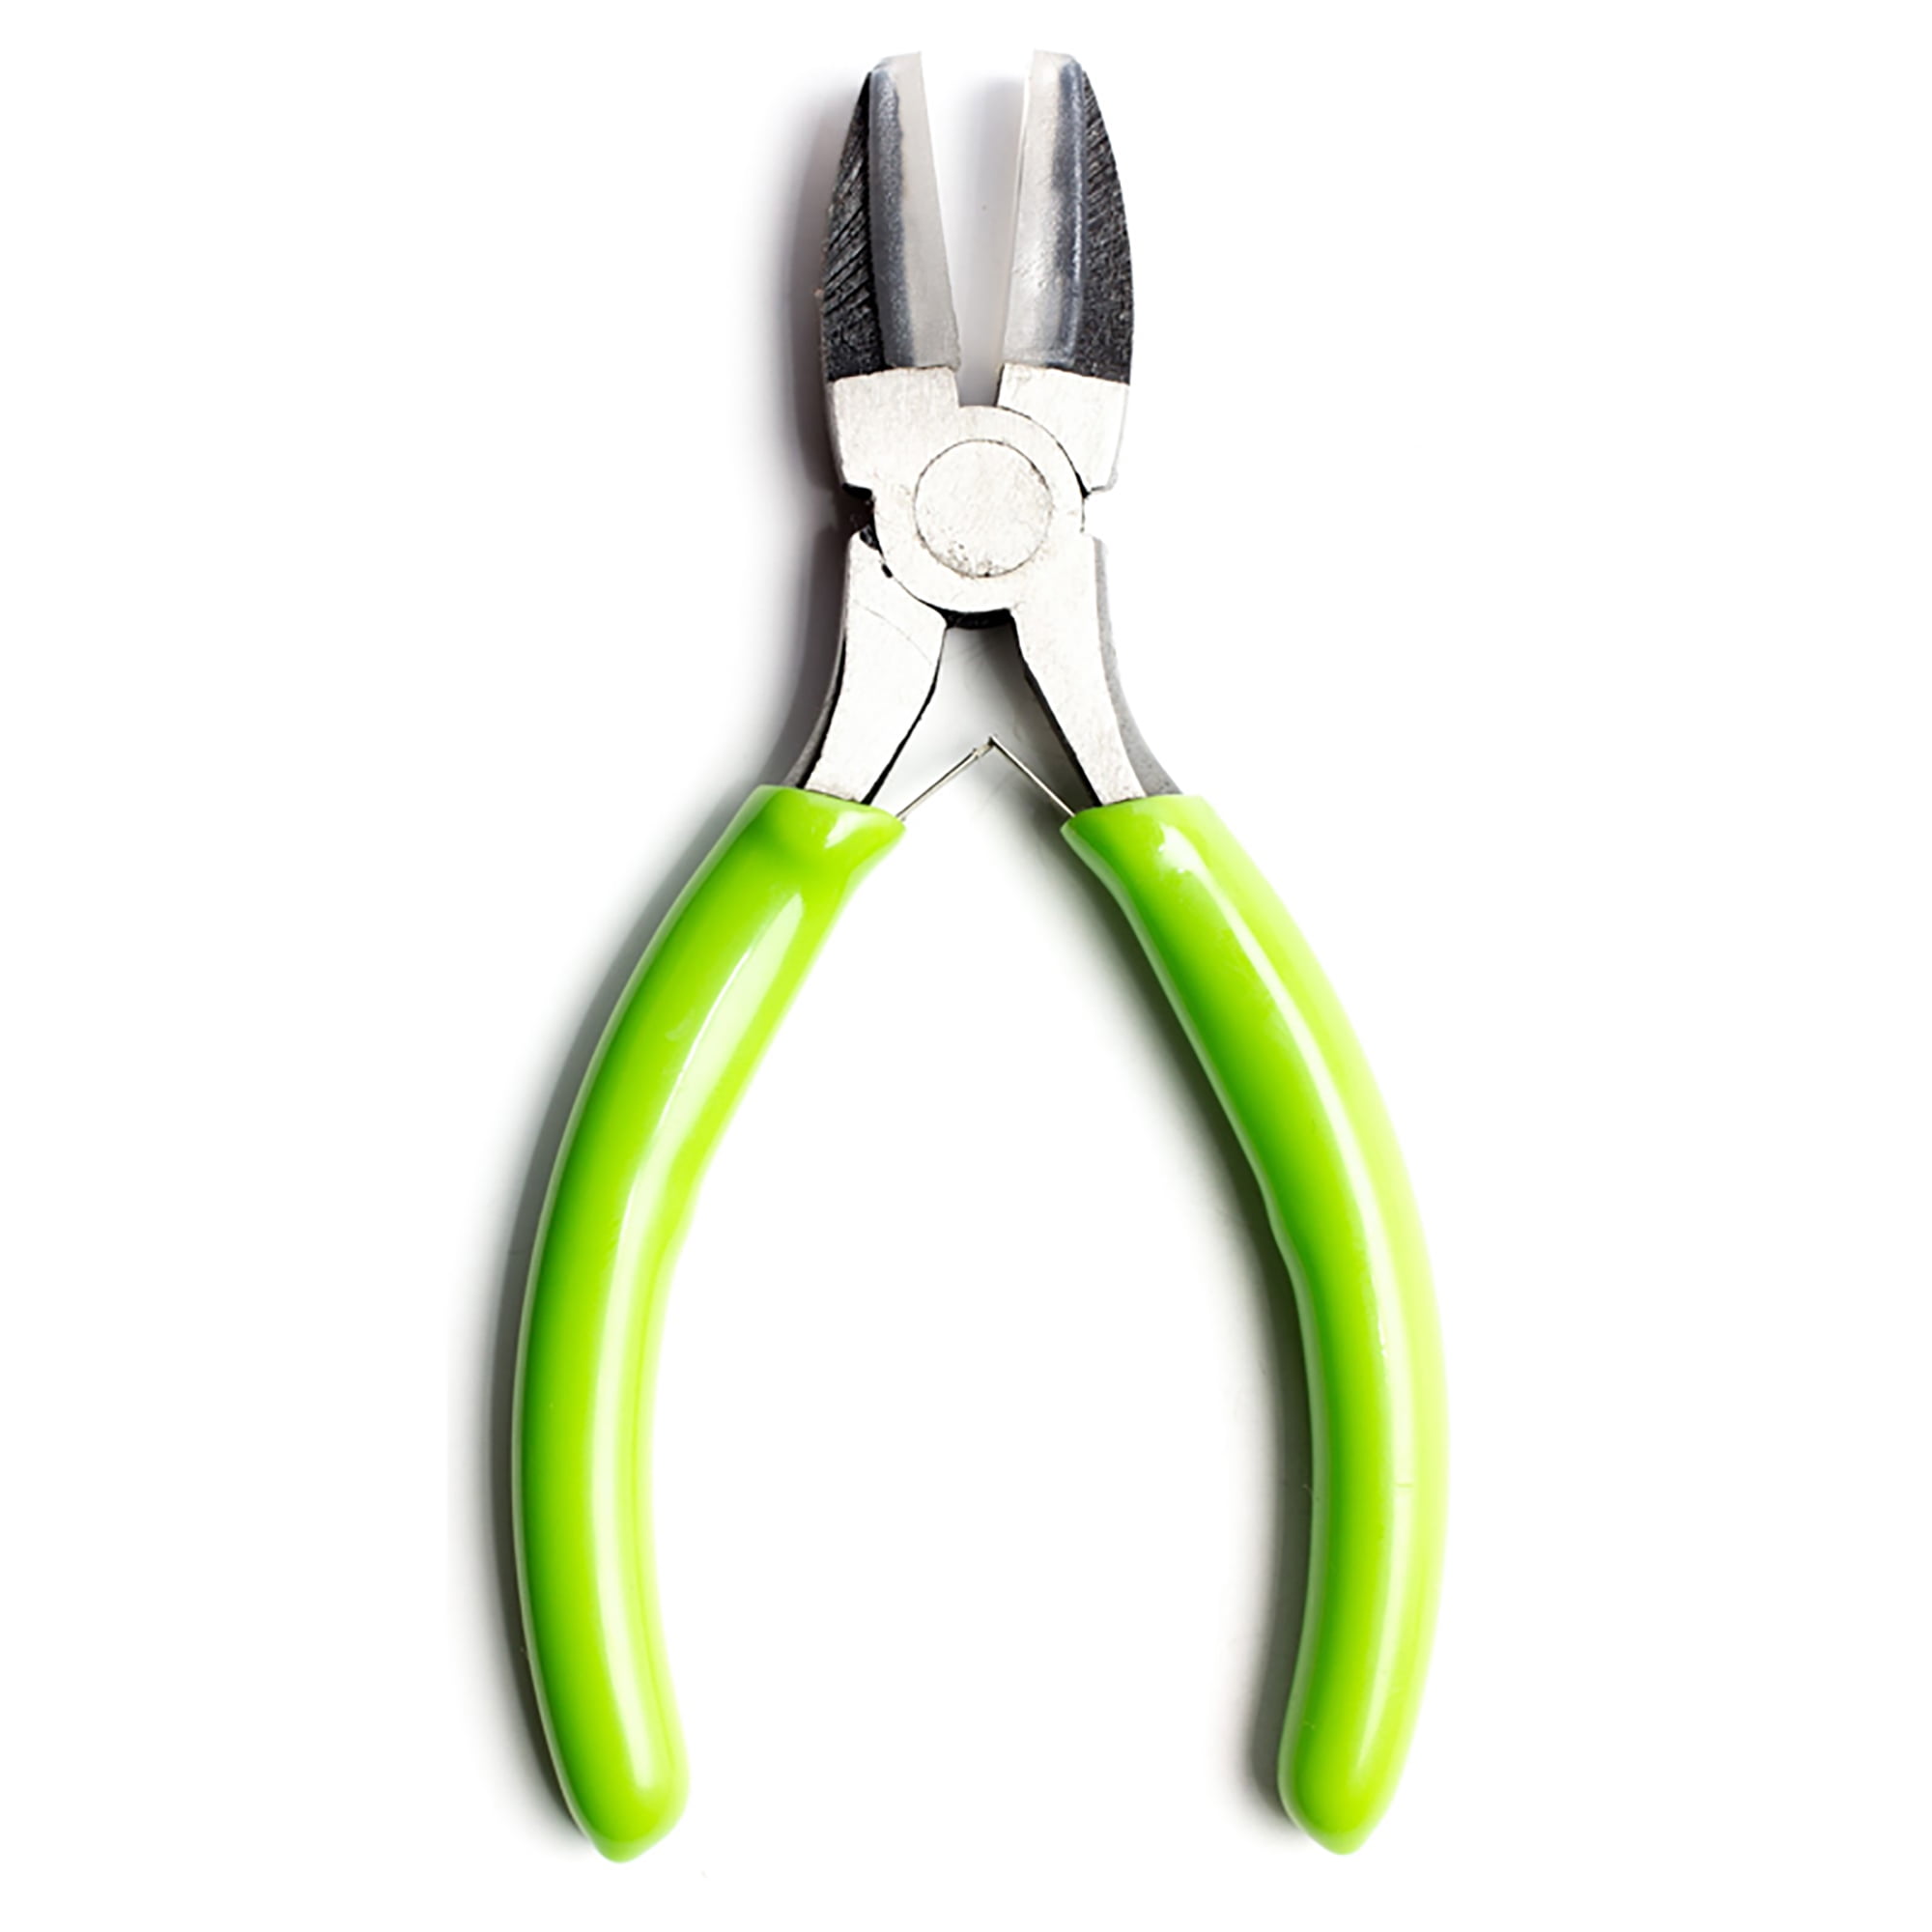 Cousin Craft & Jewelry 3 in 1 Pliers 3-Inch